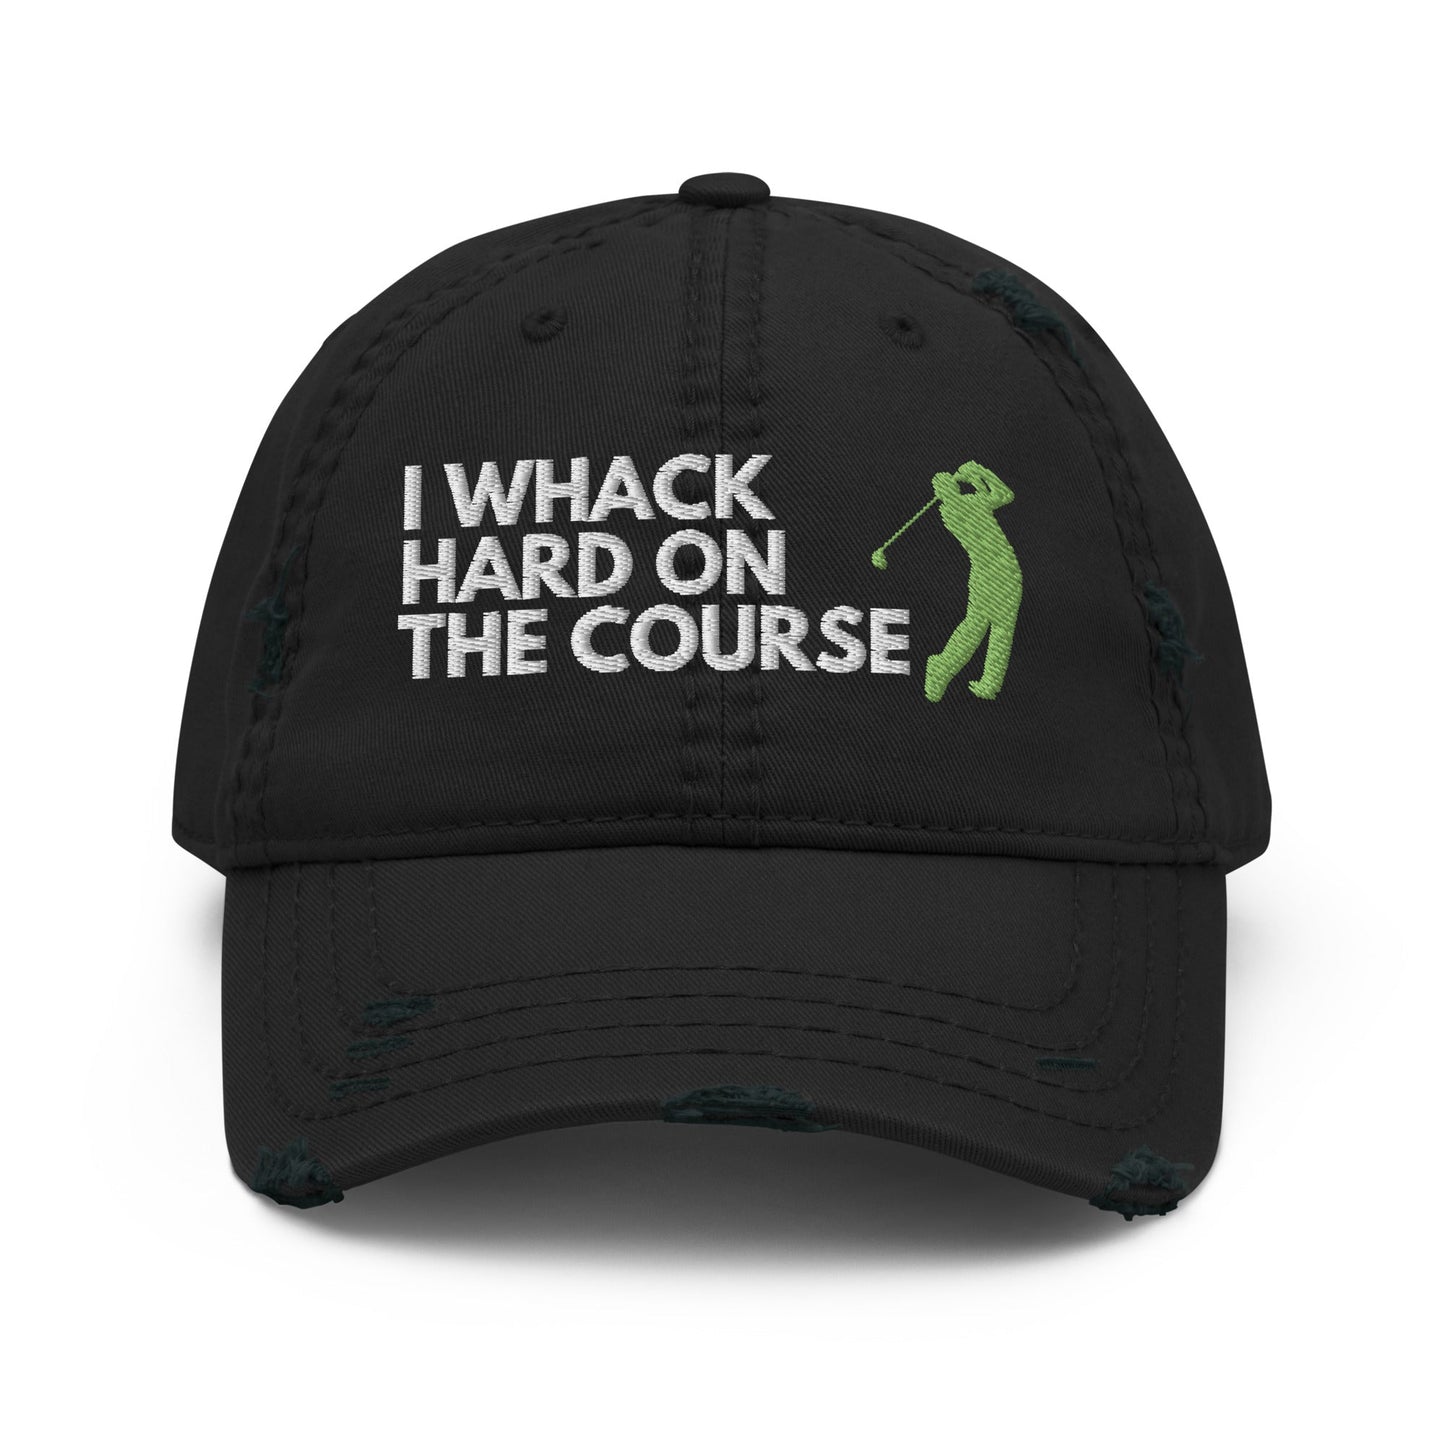 Funny Golfer Gifts  Distressed Cap Black I Whack Hard On The Course Distressed Hat